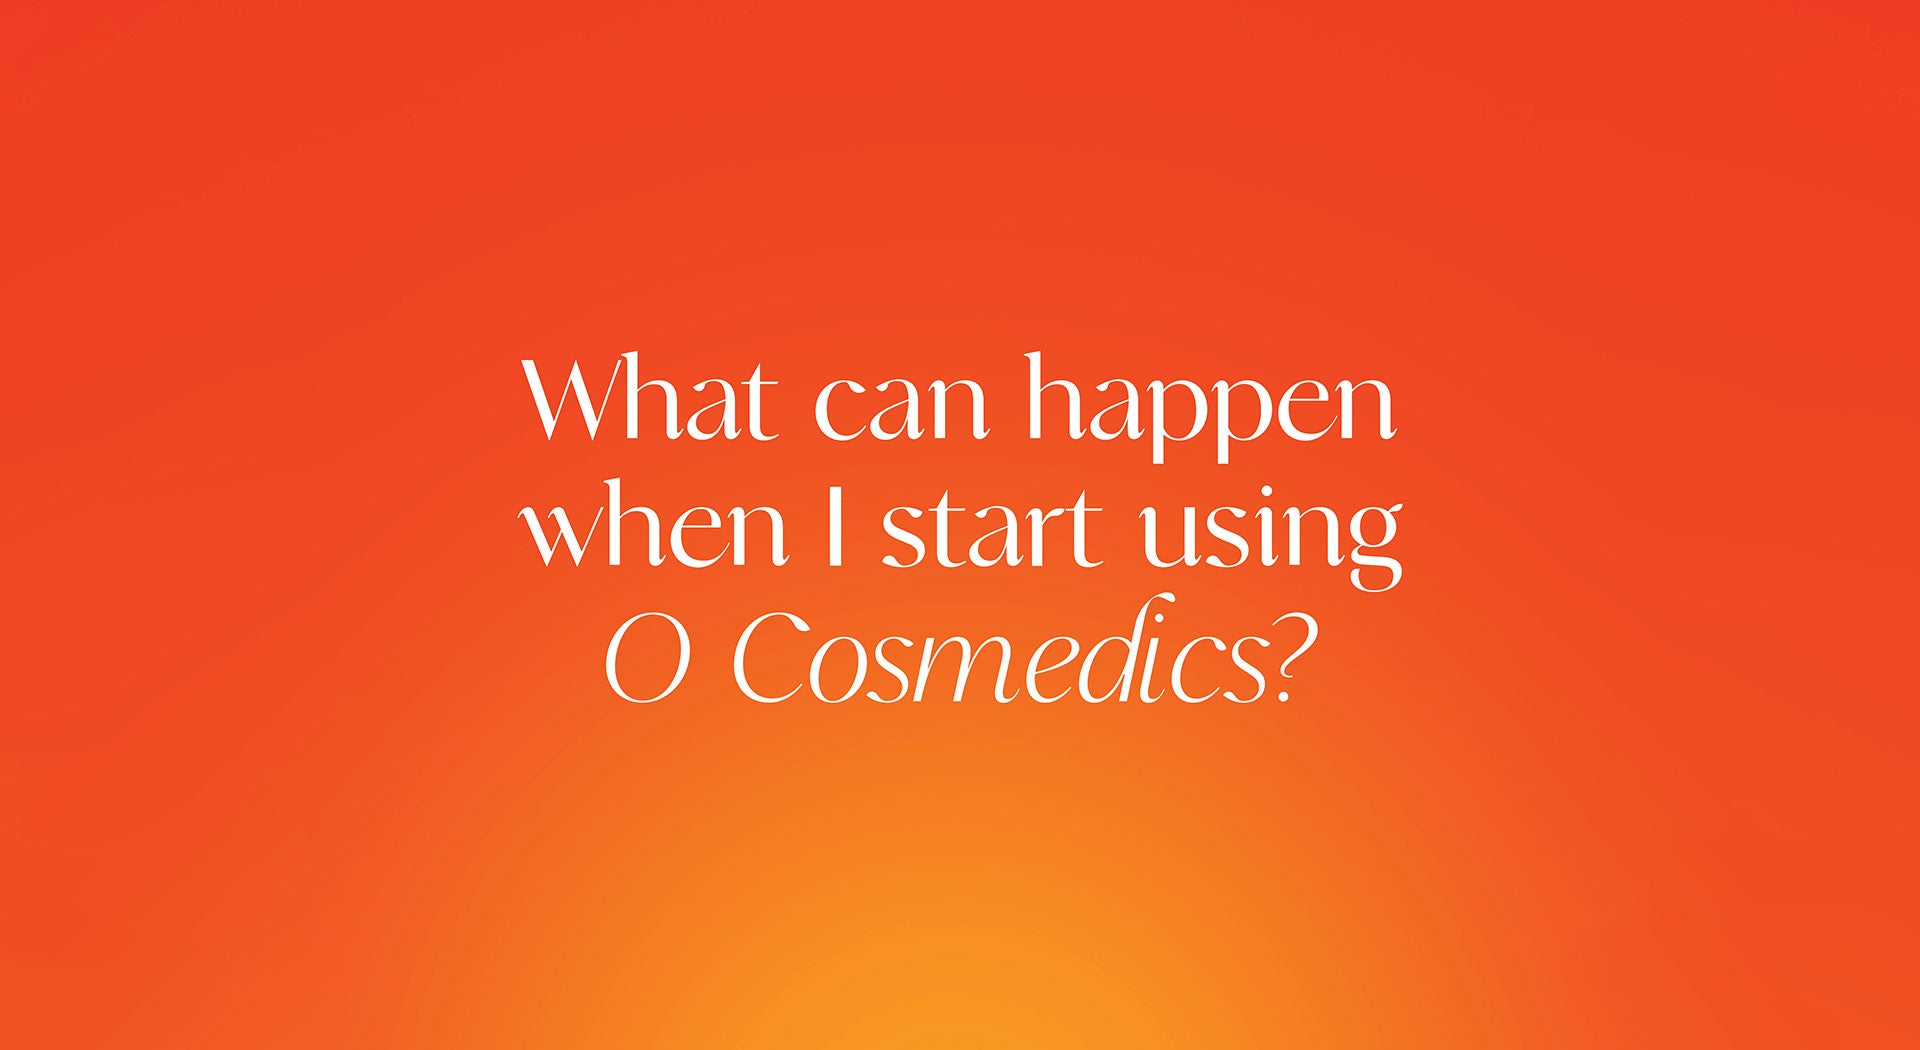 What Can Happen When I Start Using O Cosmedics?